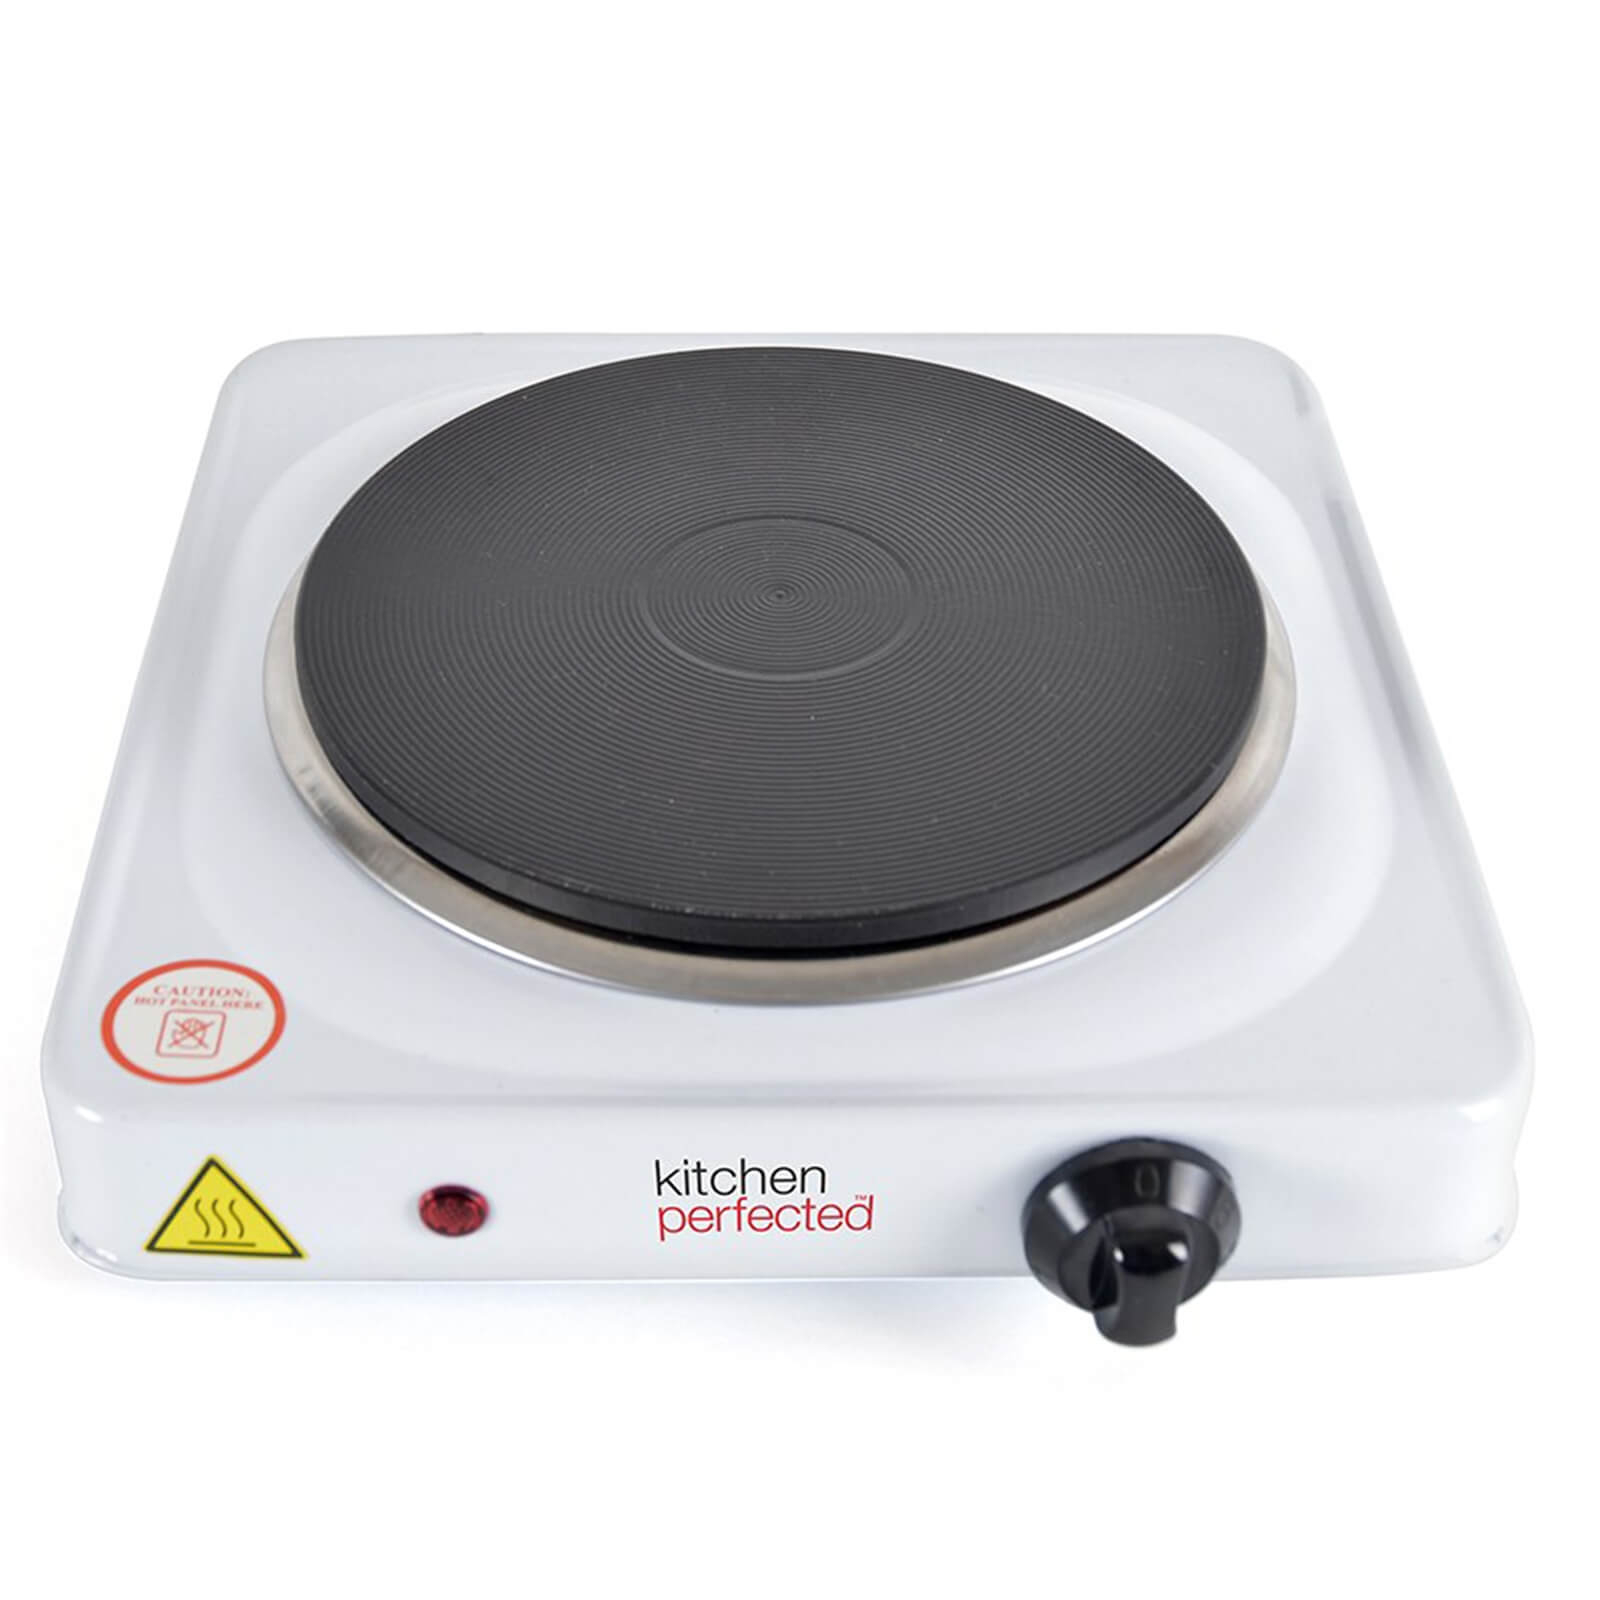 Kitchen Perfected 1500w Single Hotplate.